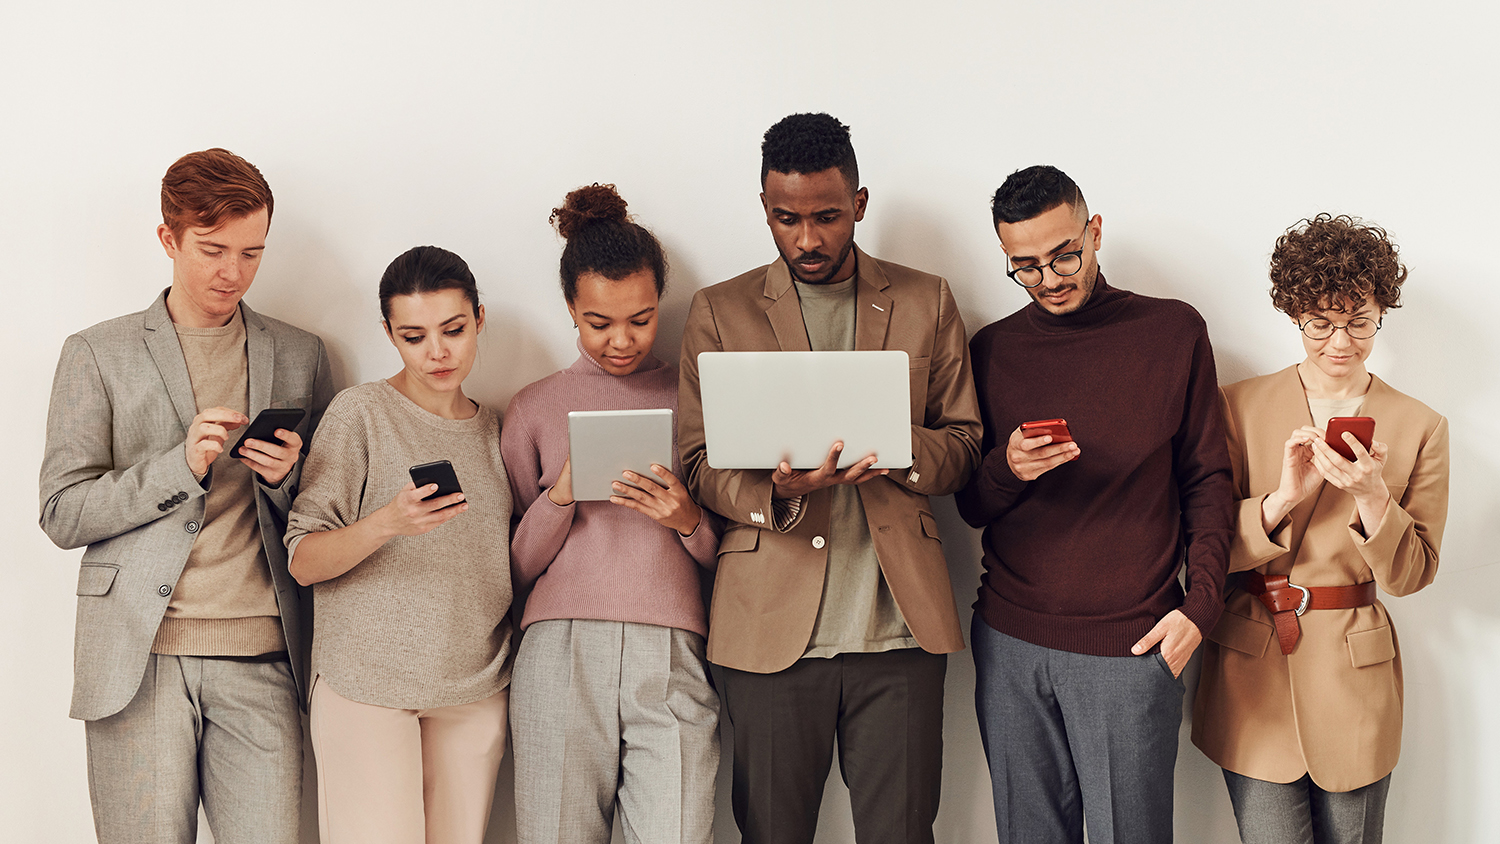 Group of people leaning against a wall using a variety of digital devices.